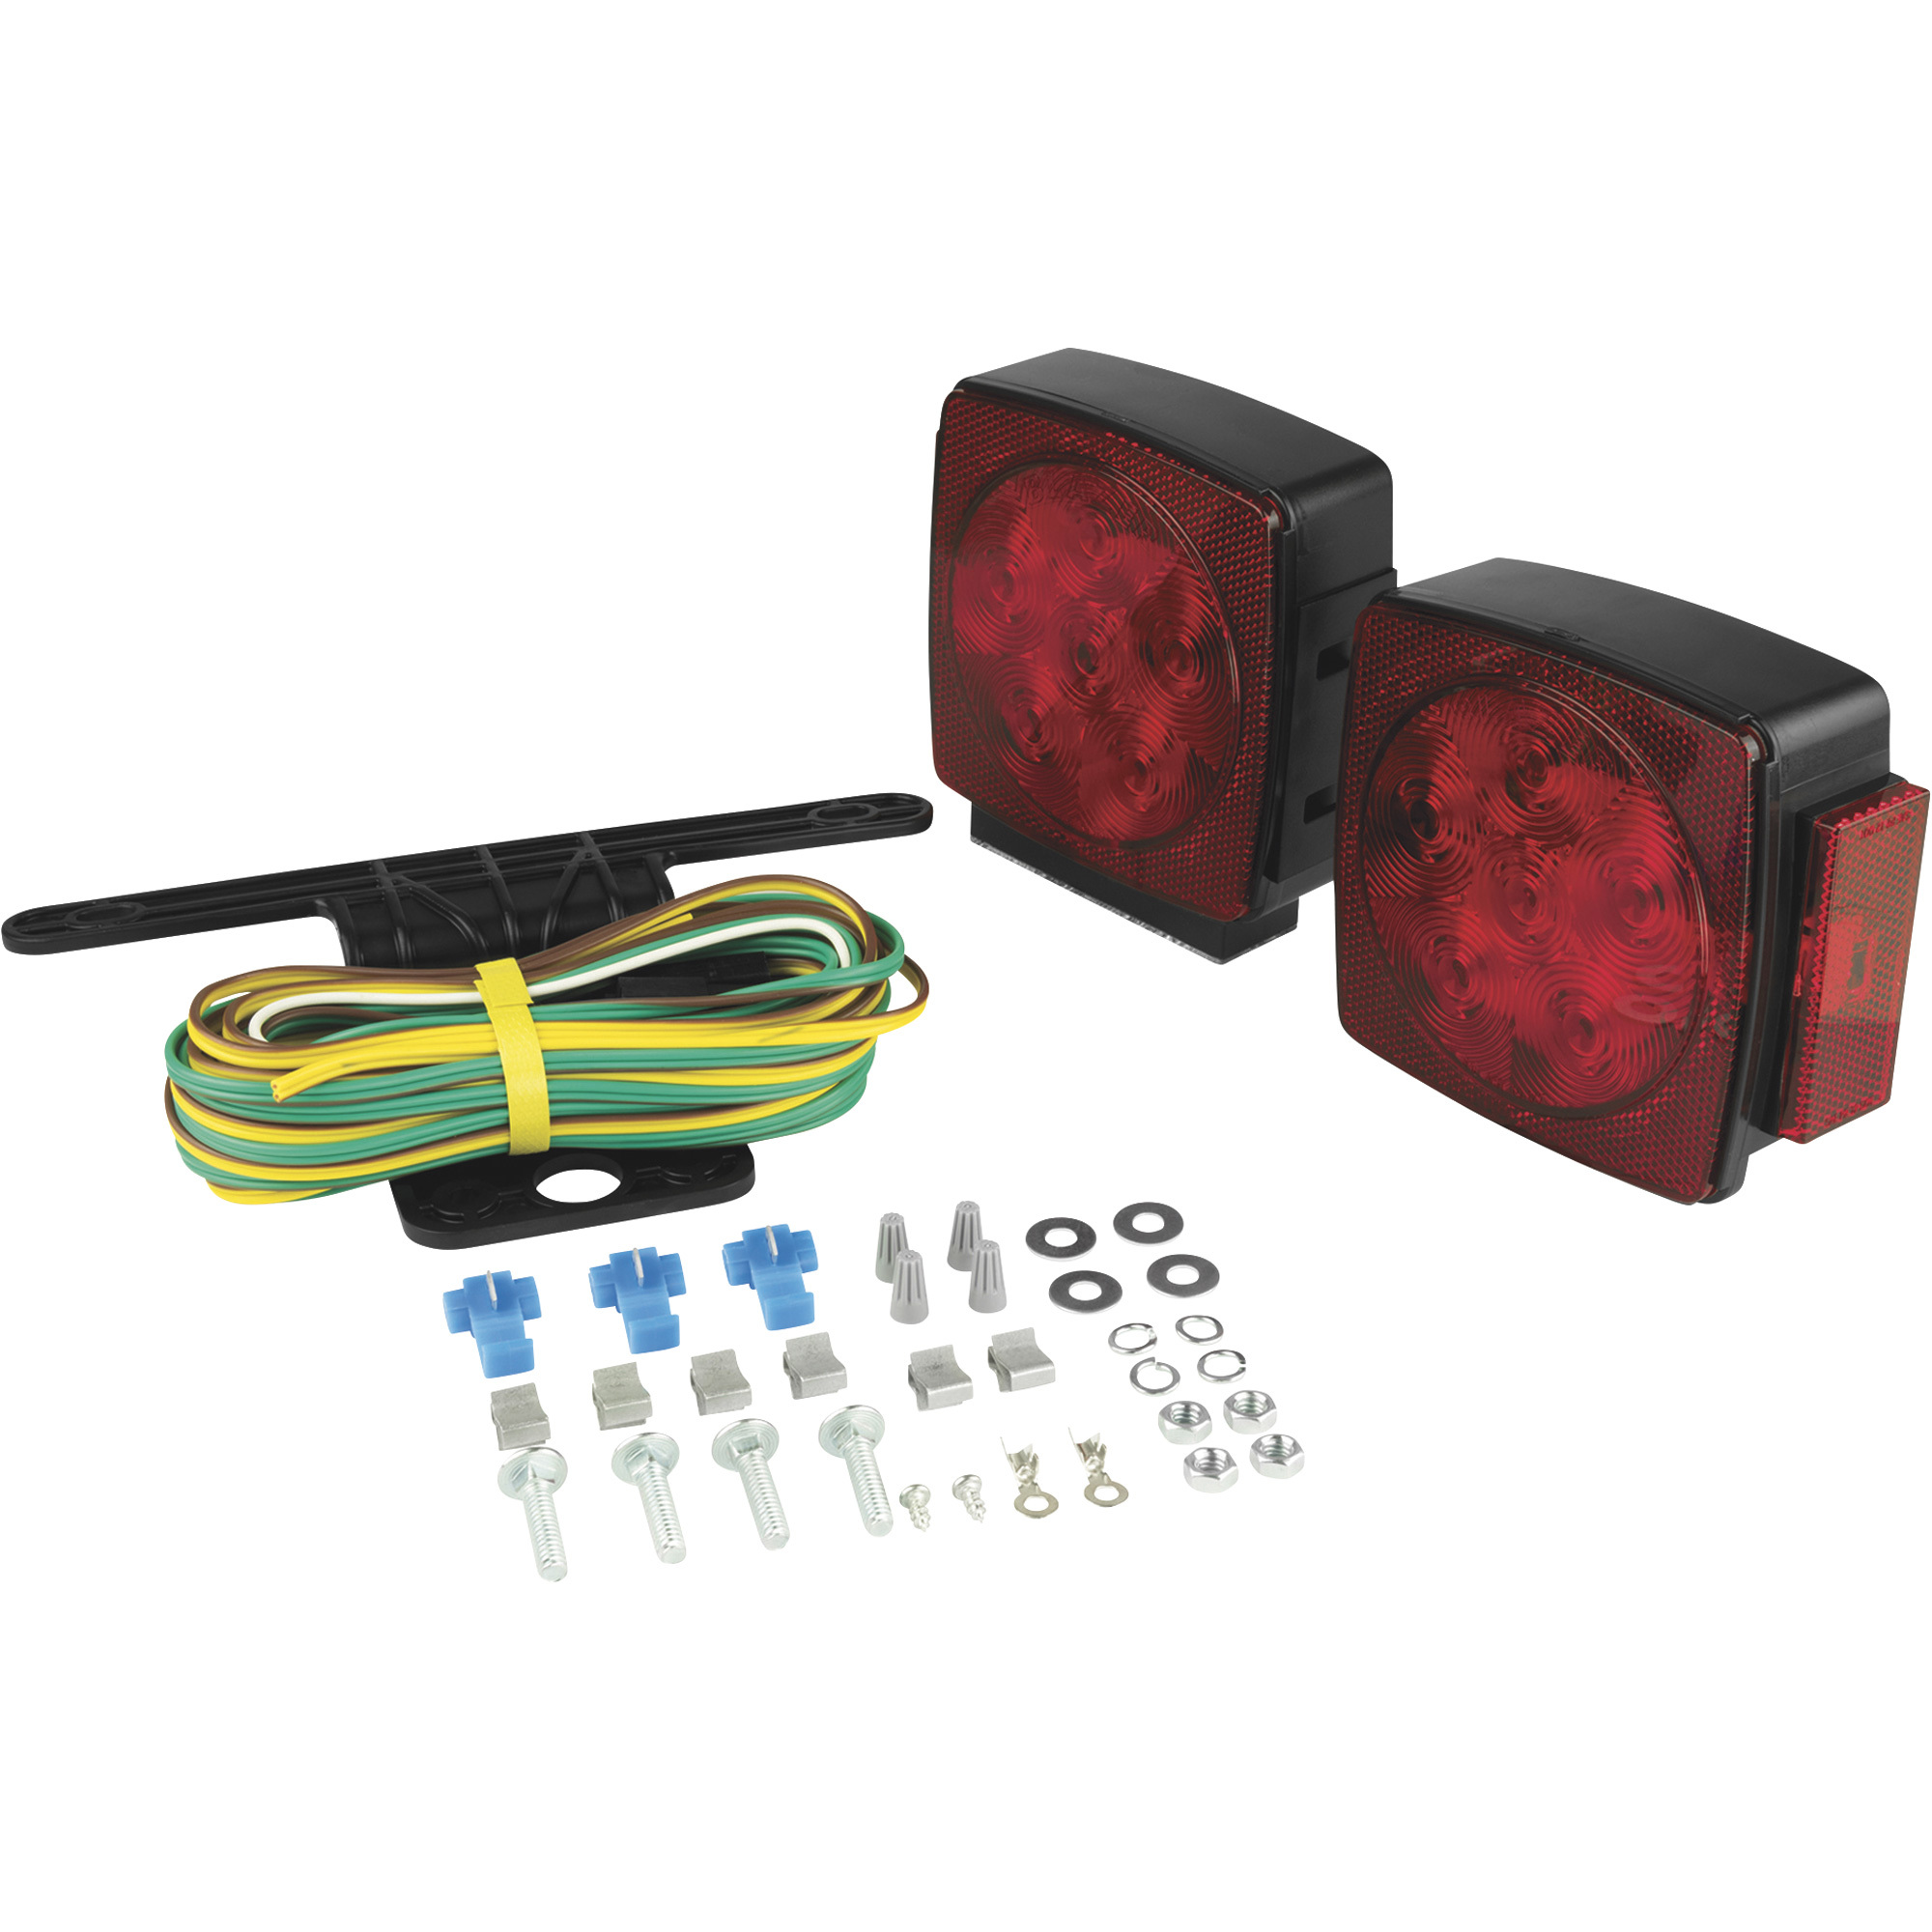 Hopkins Towing Solutions Submersible LED Trailer Light Kit â Model C7423